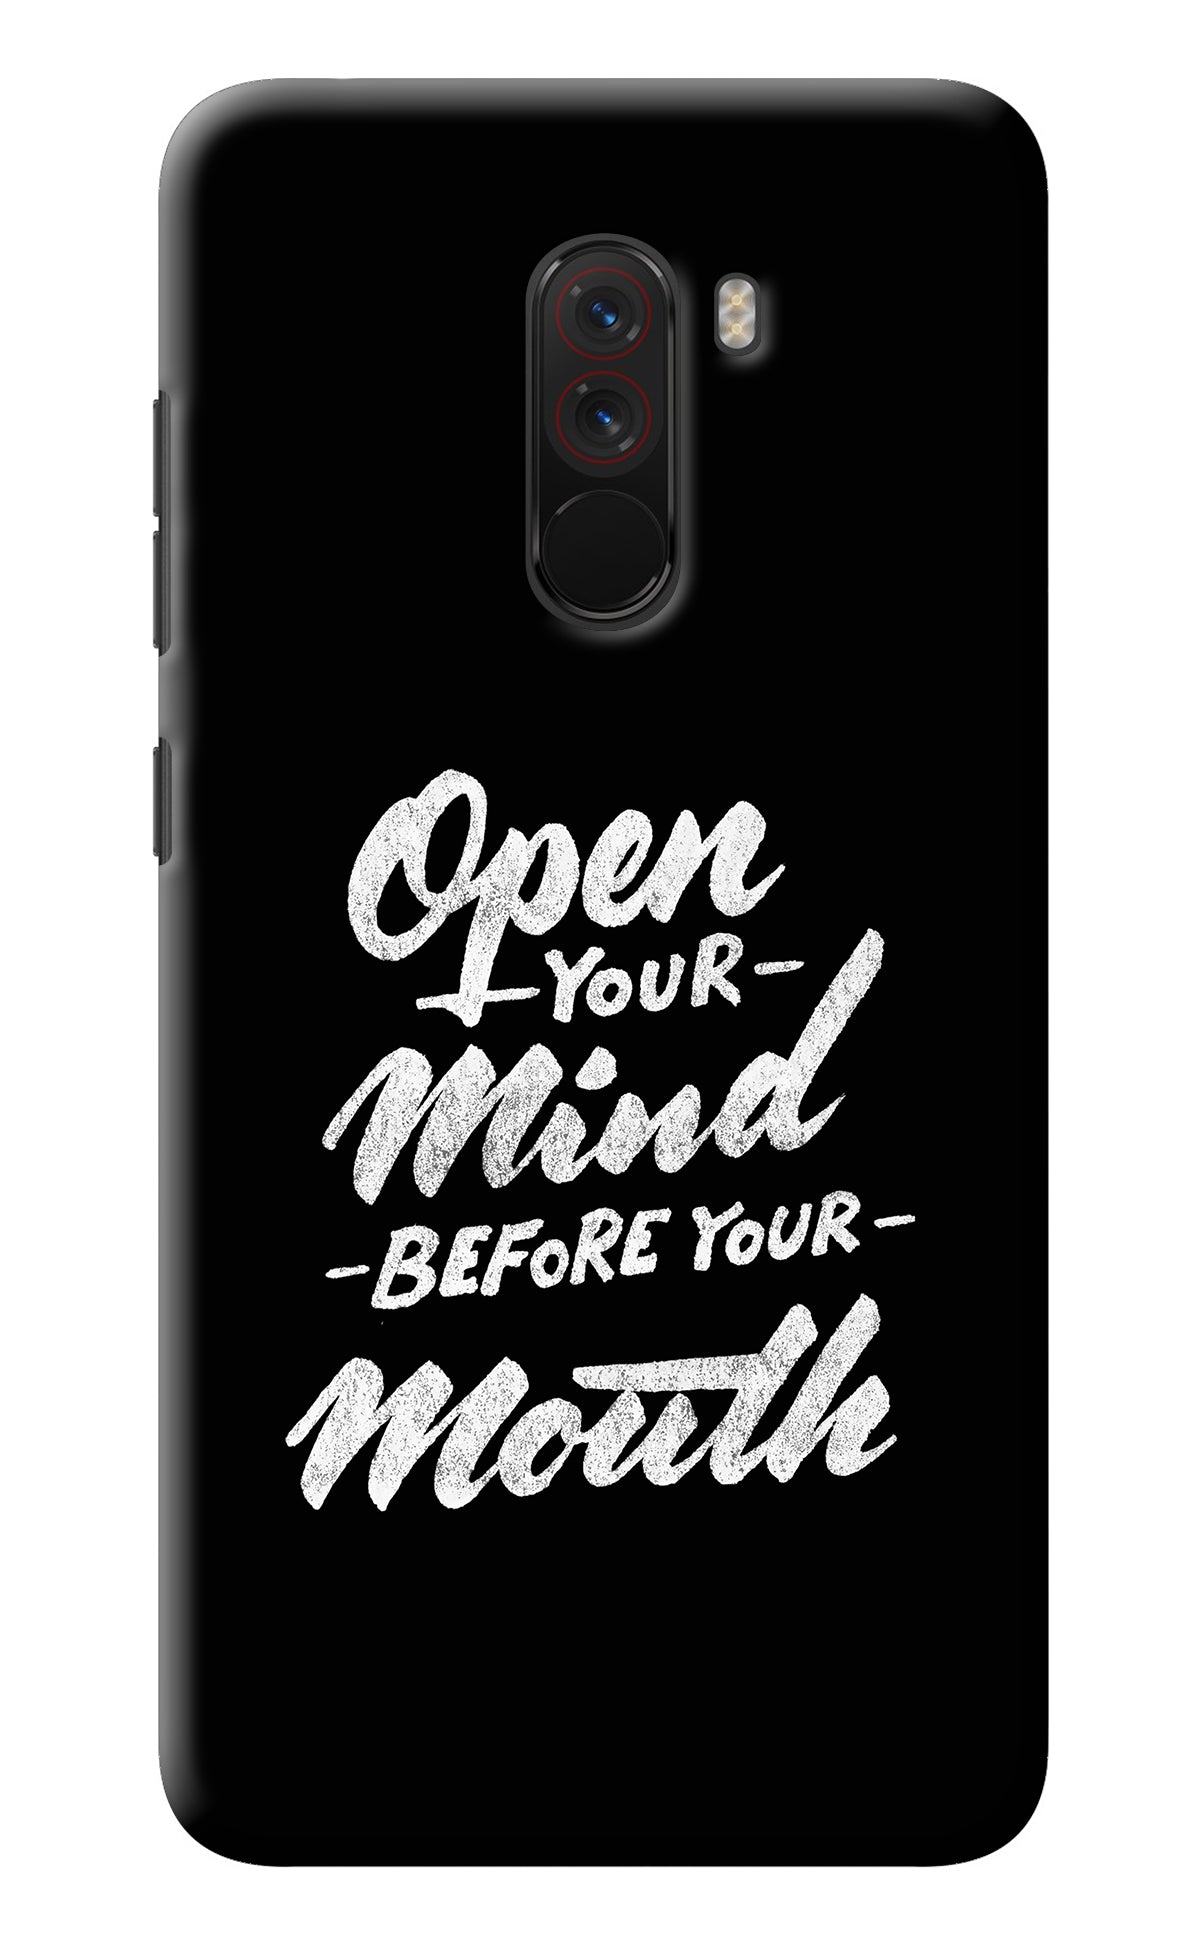 Open Your Mind Before Your Mouth Poco F1 Back Cover